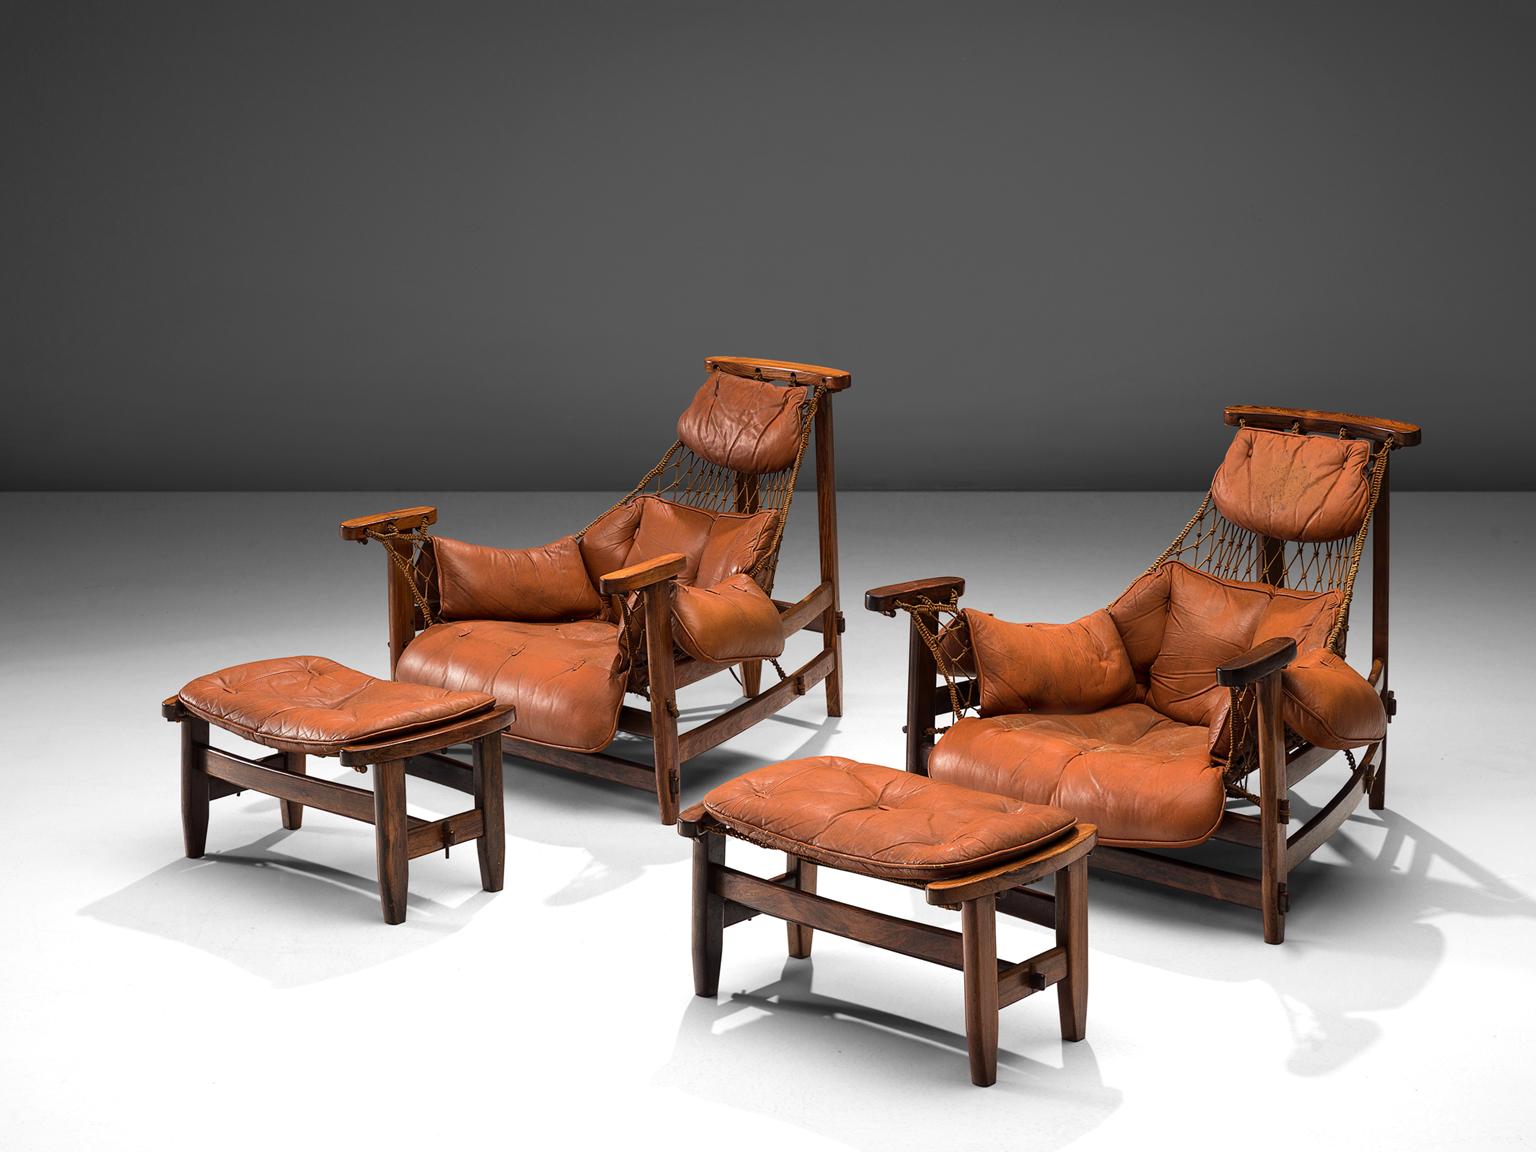 Jean Gillon, 'Jangada' pair of armchairs and ottomans, rosewood, nylon rope, leather, Brazil, 1968.

These robust and hefty armchairs are designed by Jean Gillon. The originality of these Janganda come from the concept of the body being captured